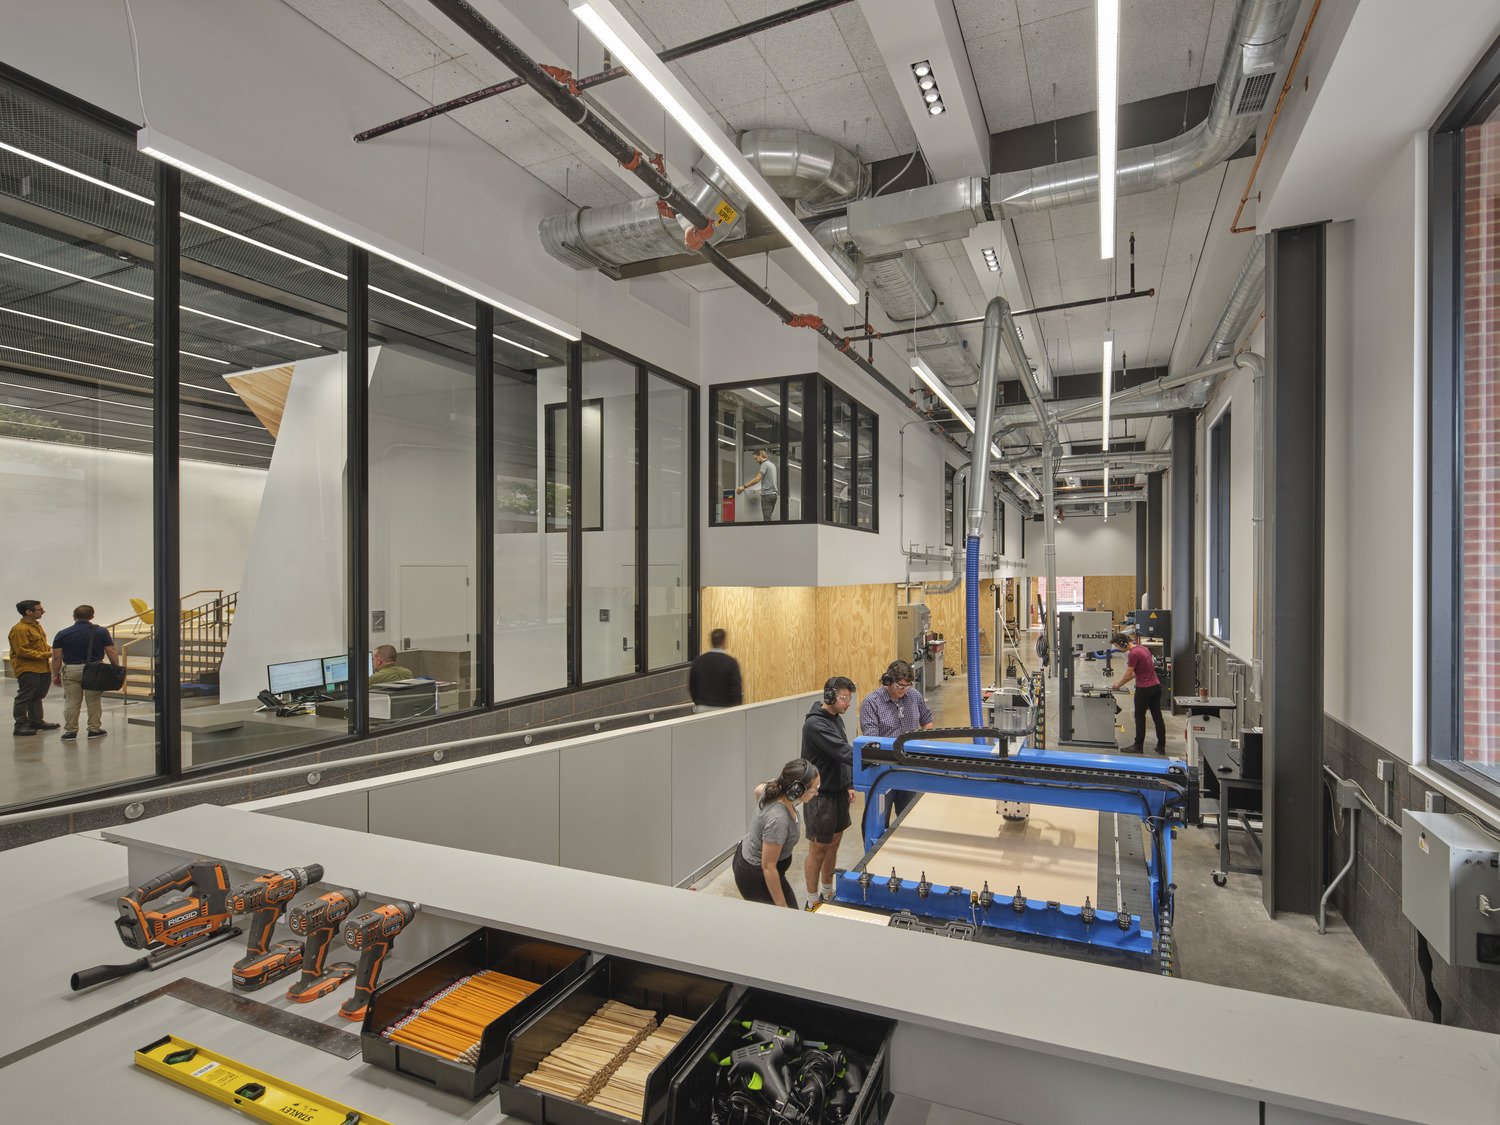 <p>The fabrication studios are the center of Penn State's culture of making and are visible from every direction. Strategic glass enclosures highlight the building's purpose and are an invitation for many different user groups and disciplines. <small>&copy; Halkin Mason Photography</small></p>